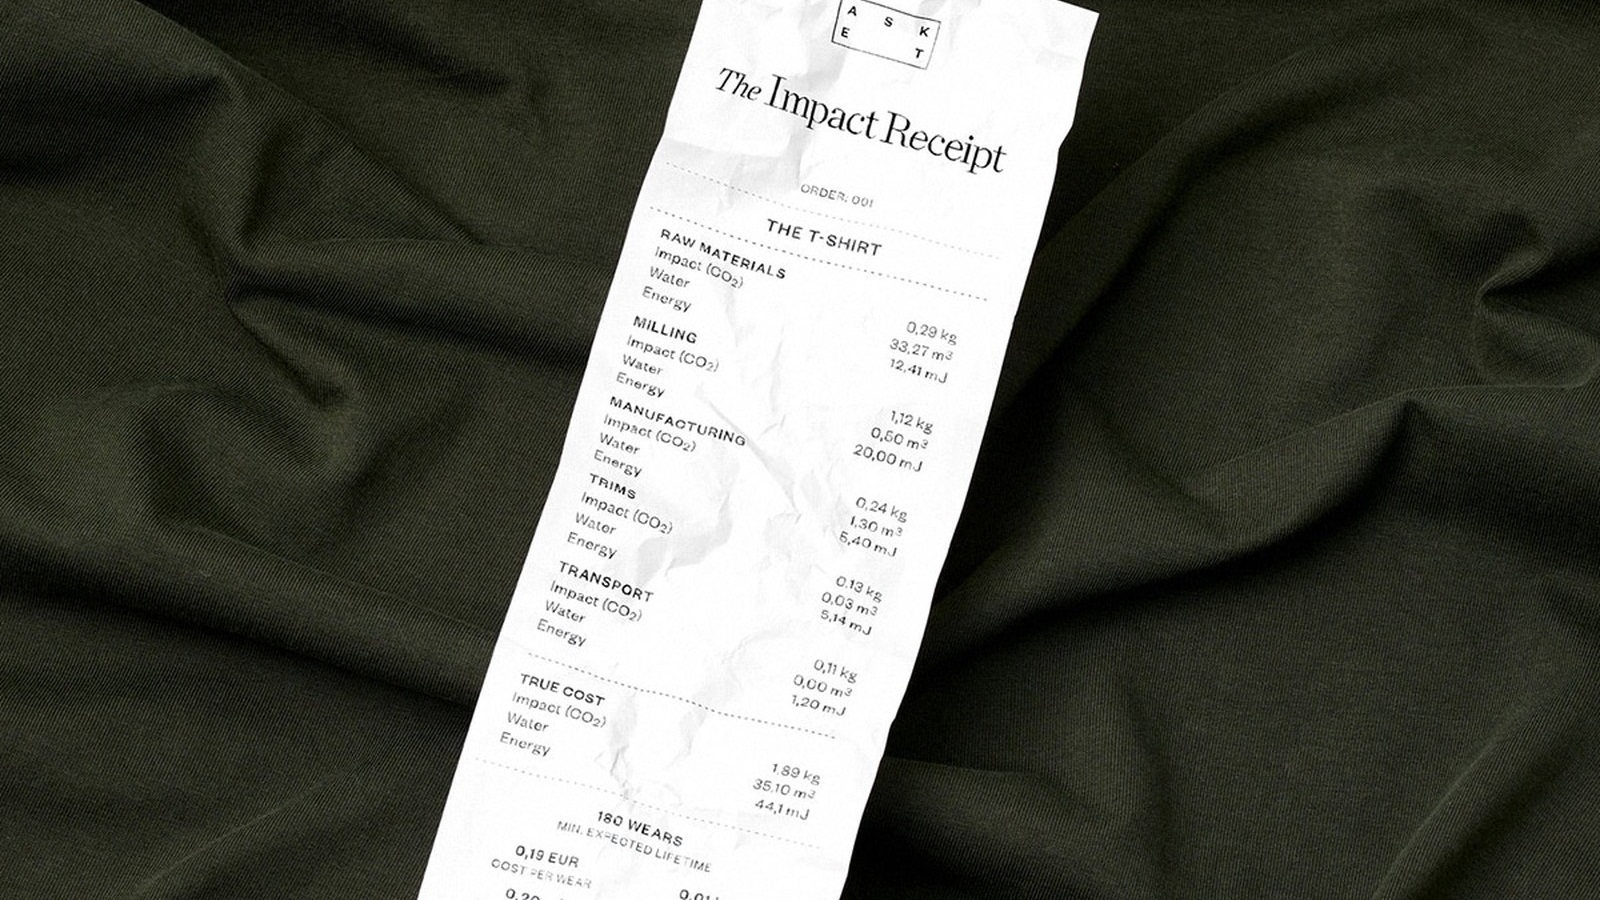 #TBT: Receipt Lists the Environmental Impact of Garments’ Production